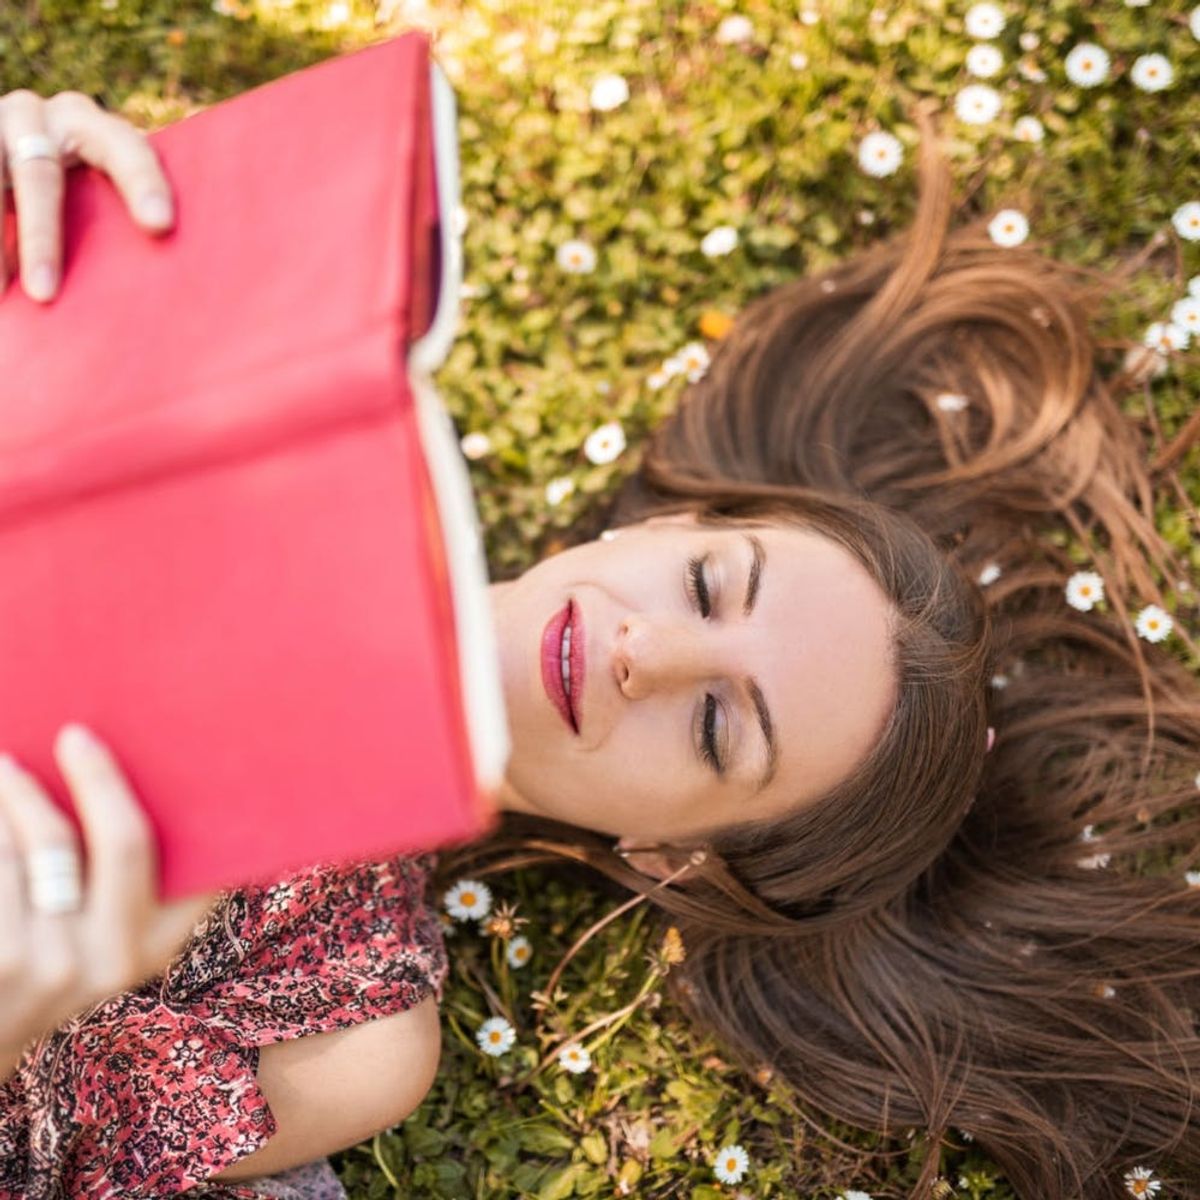 3 New Books to Help You Escape the World RN